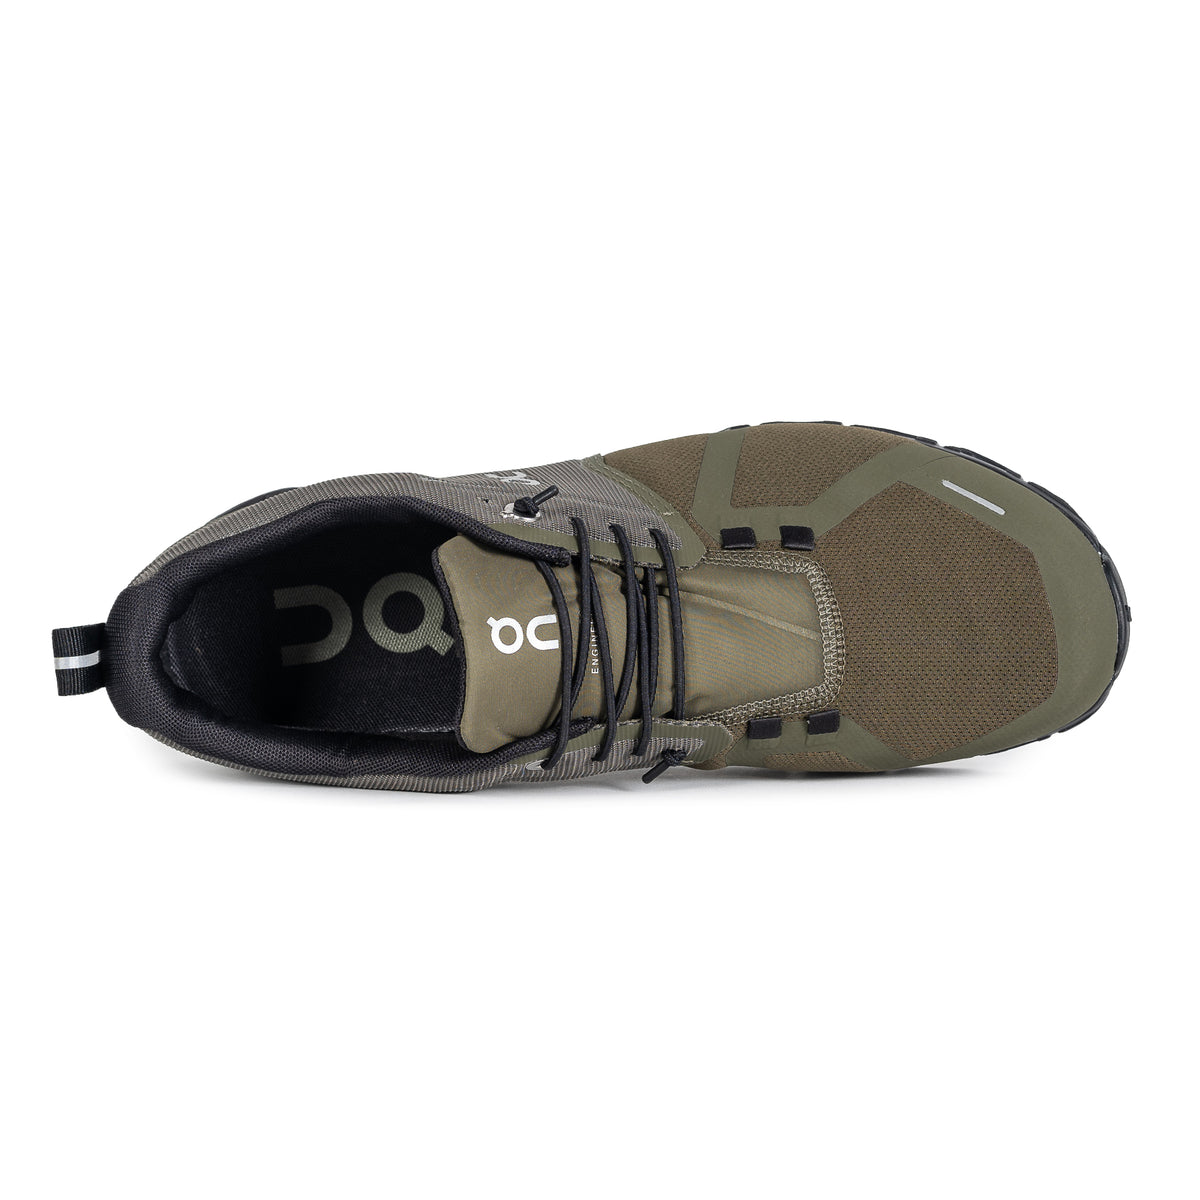 Load image into Gallery viewer, On Running Olive-Black Cloud 5 Waterproof Trainer
